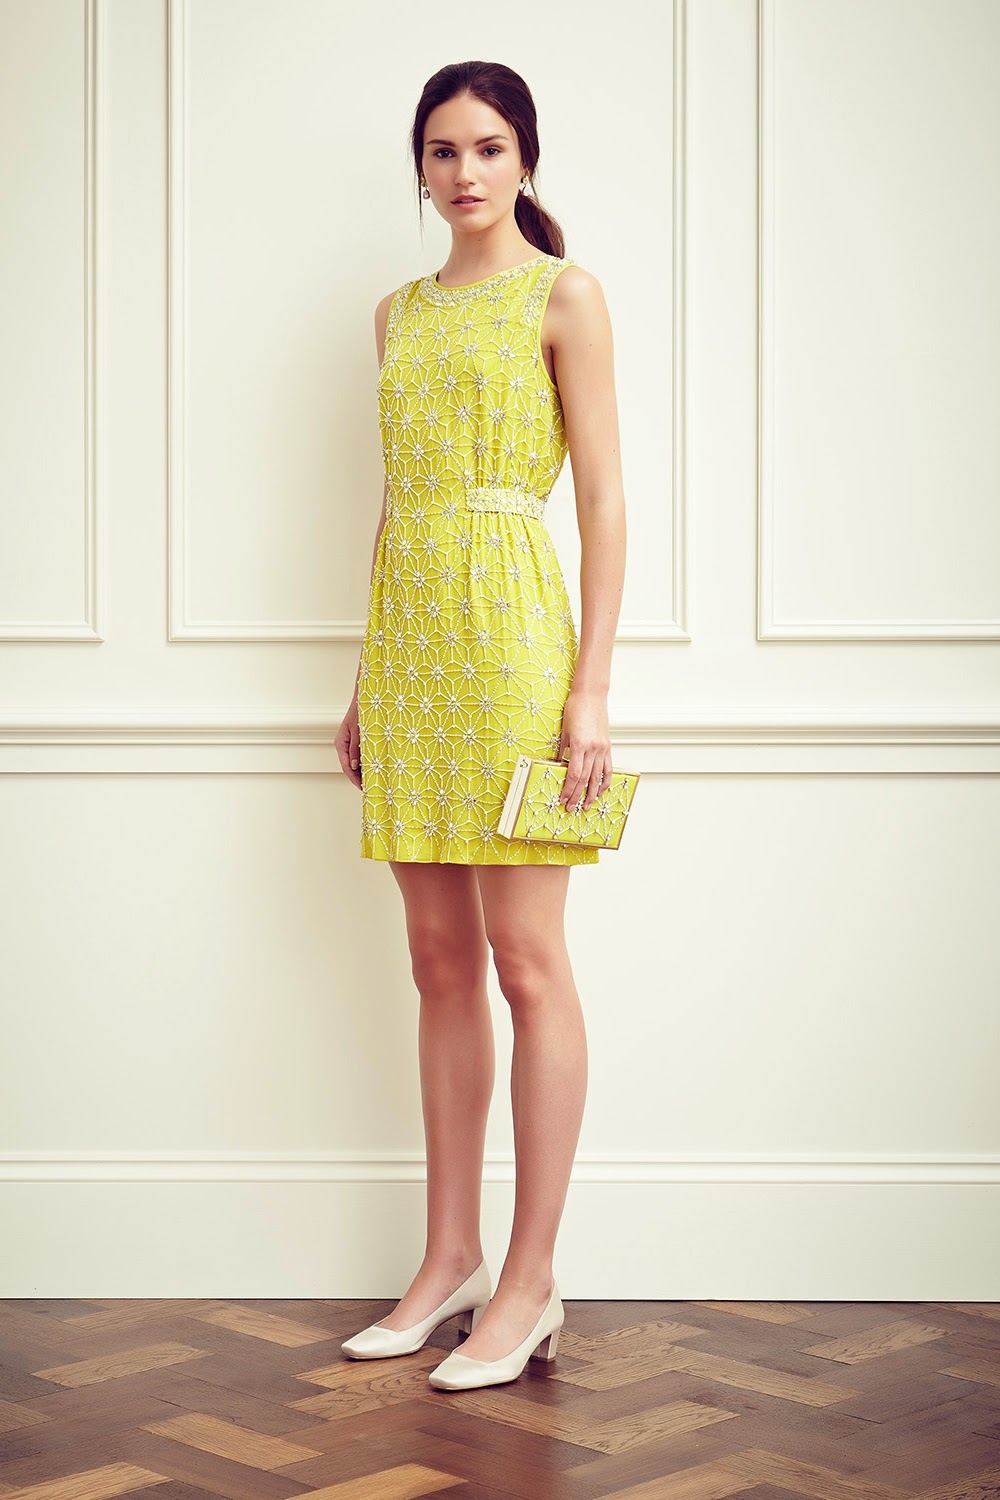 Style Know Hows: JENNY PACKHAM RESORT 2015